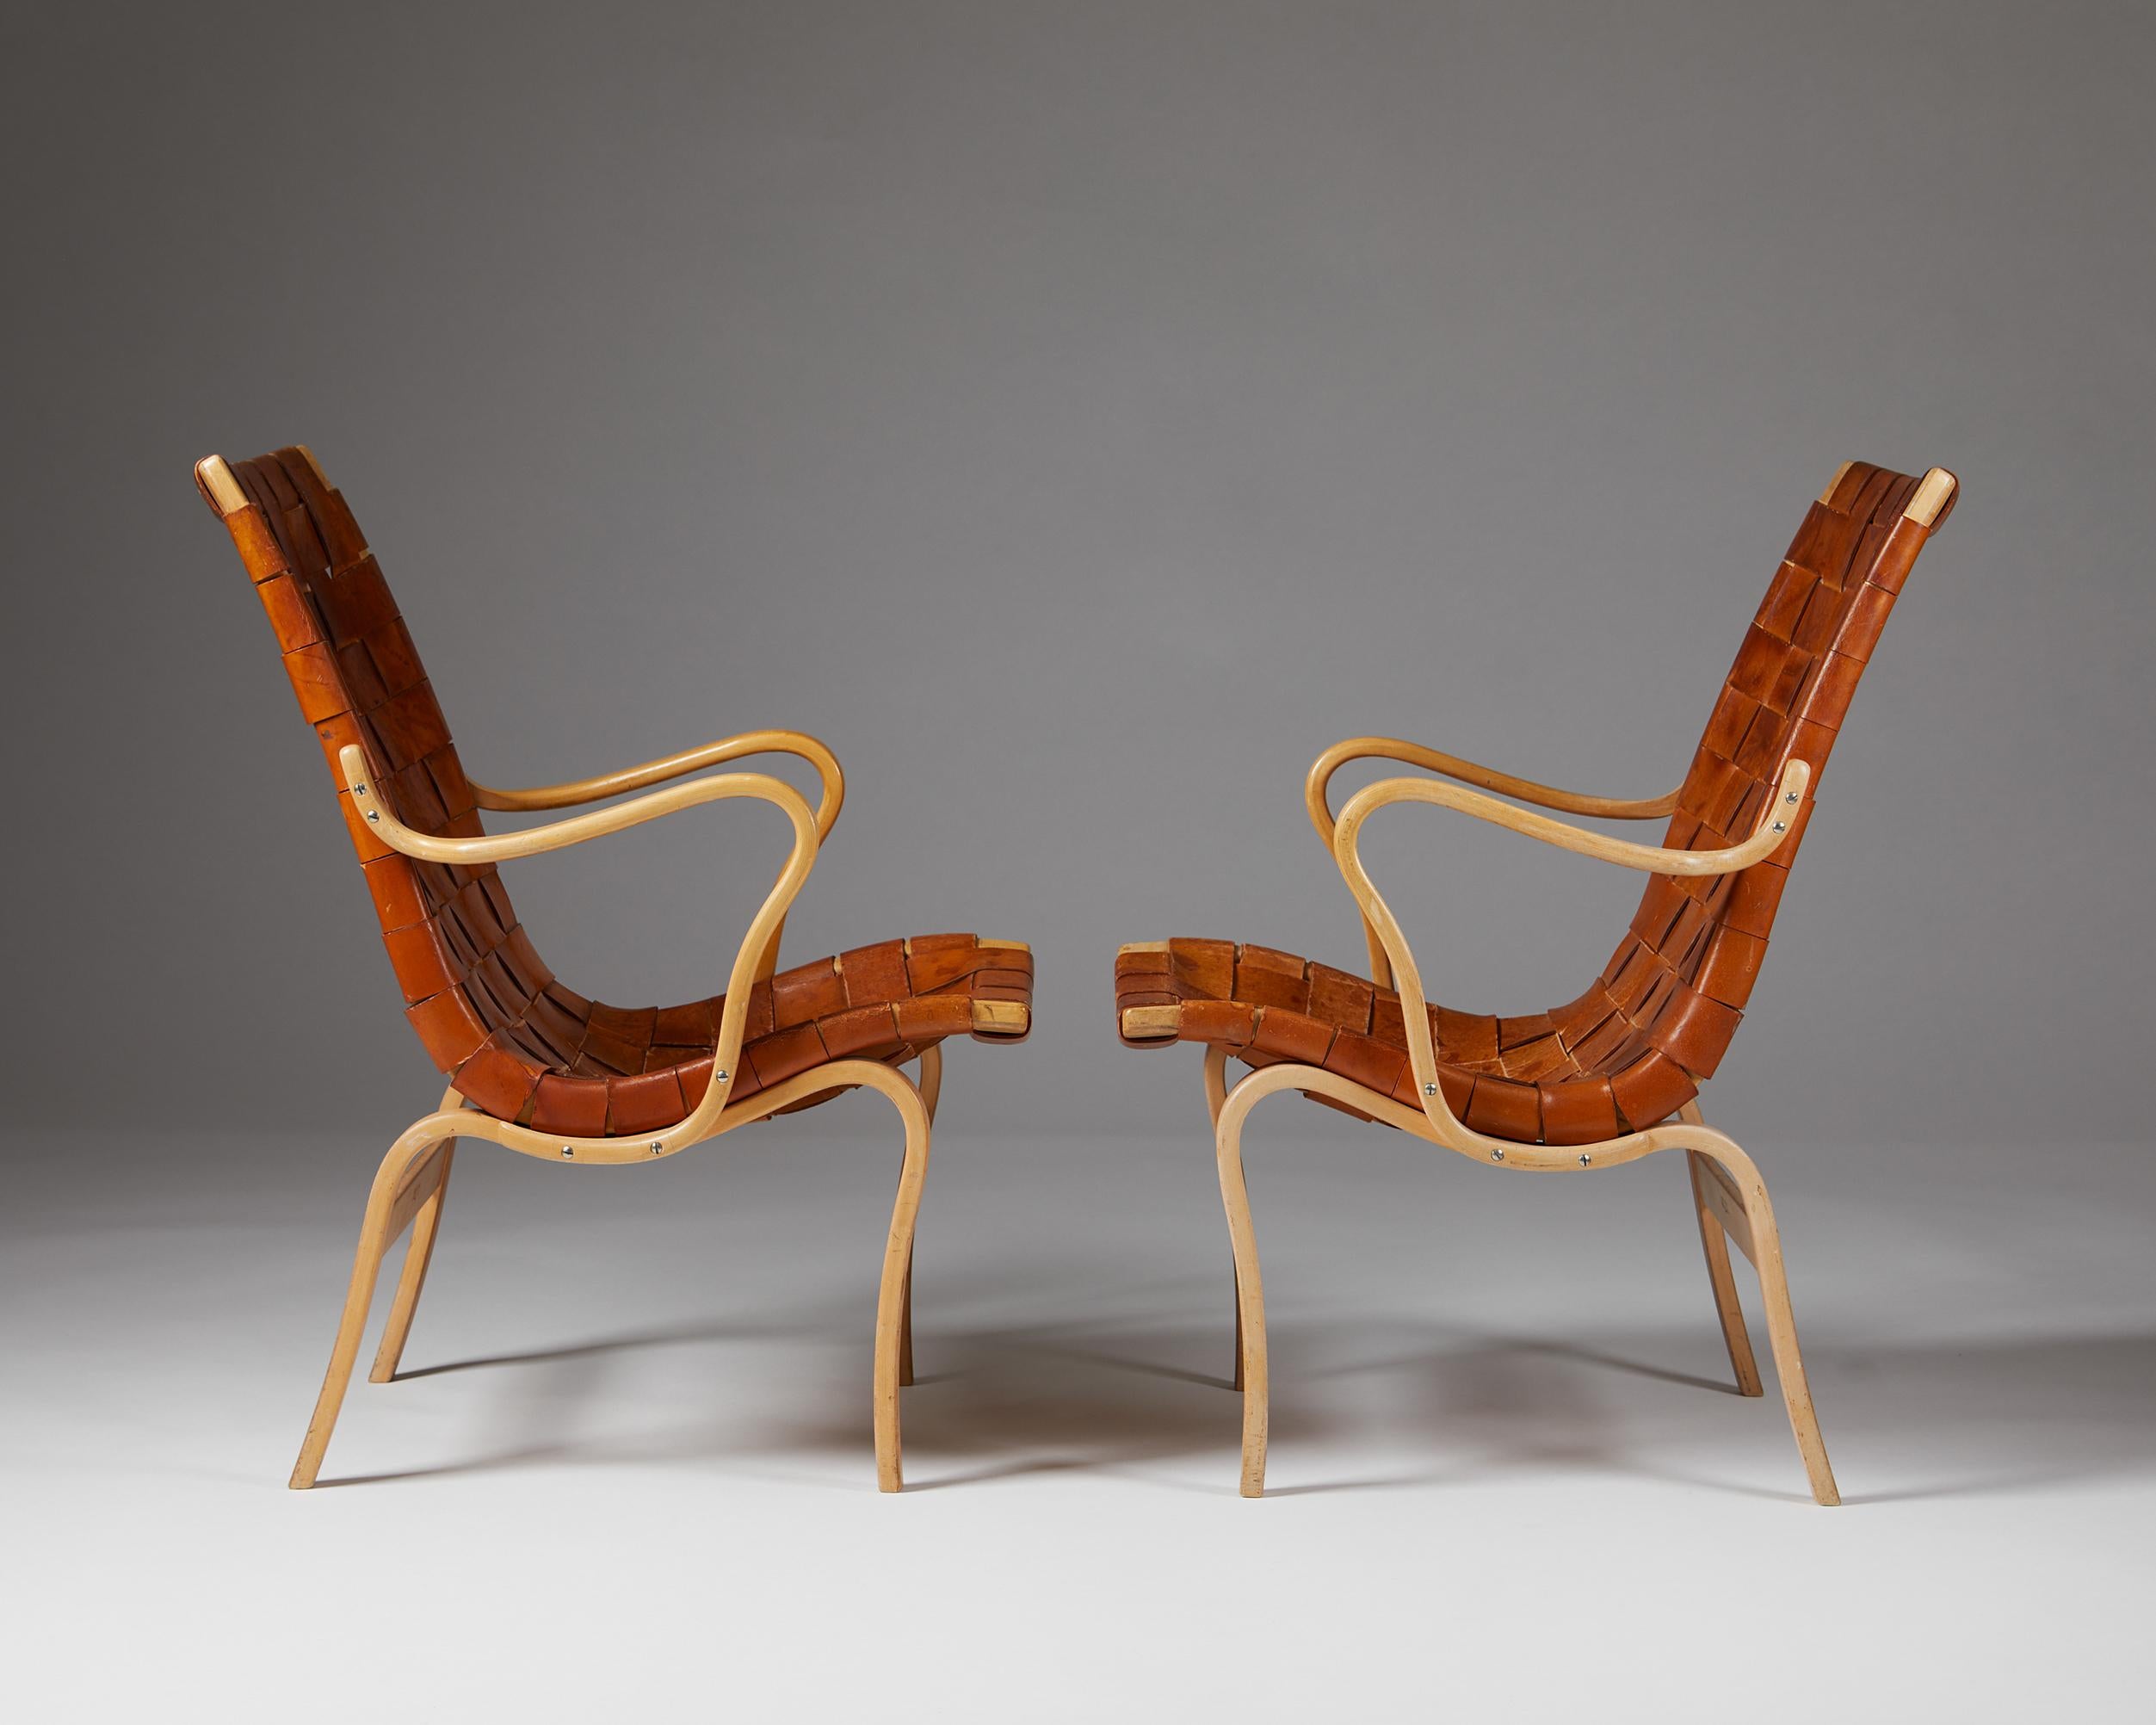 Leather Pair of Armchairs ‘Eva’ Designed by Bruno Mathsson for Karl Mathsson, Sweden